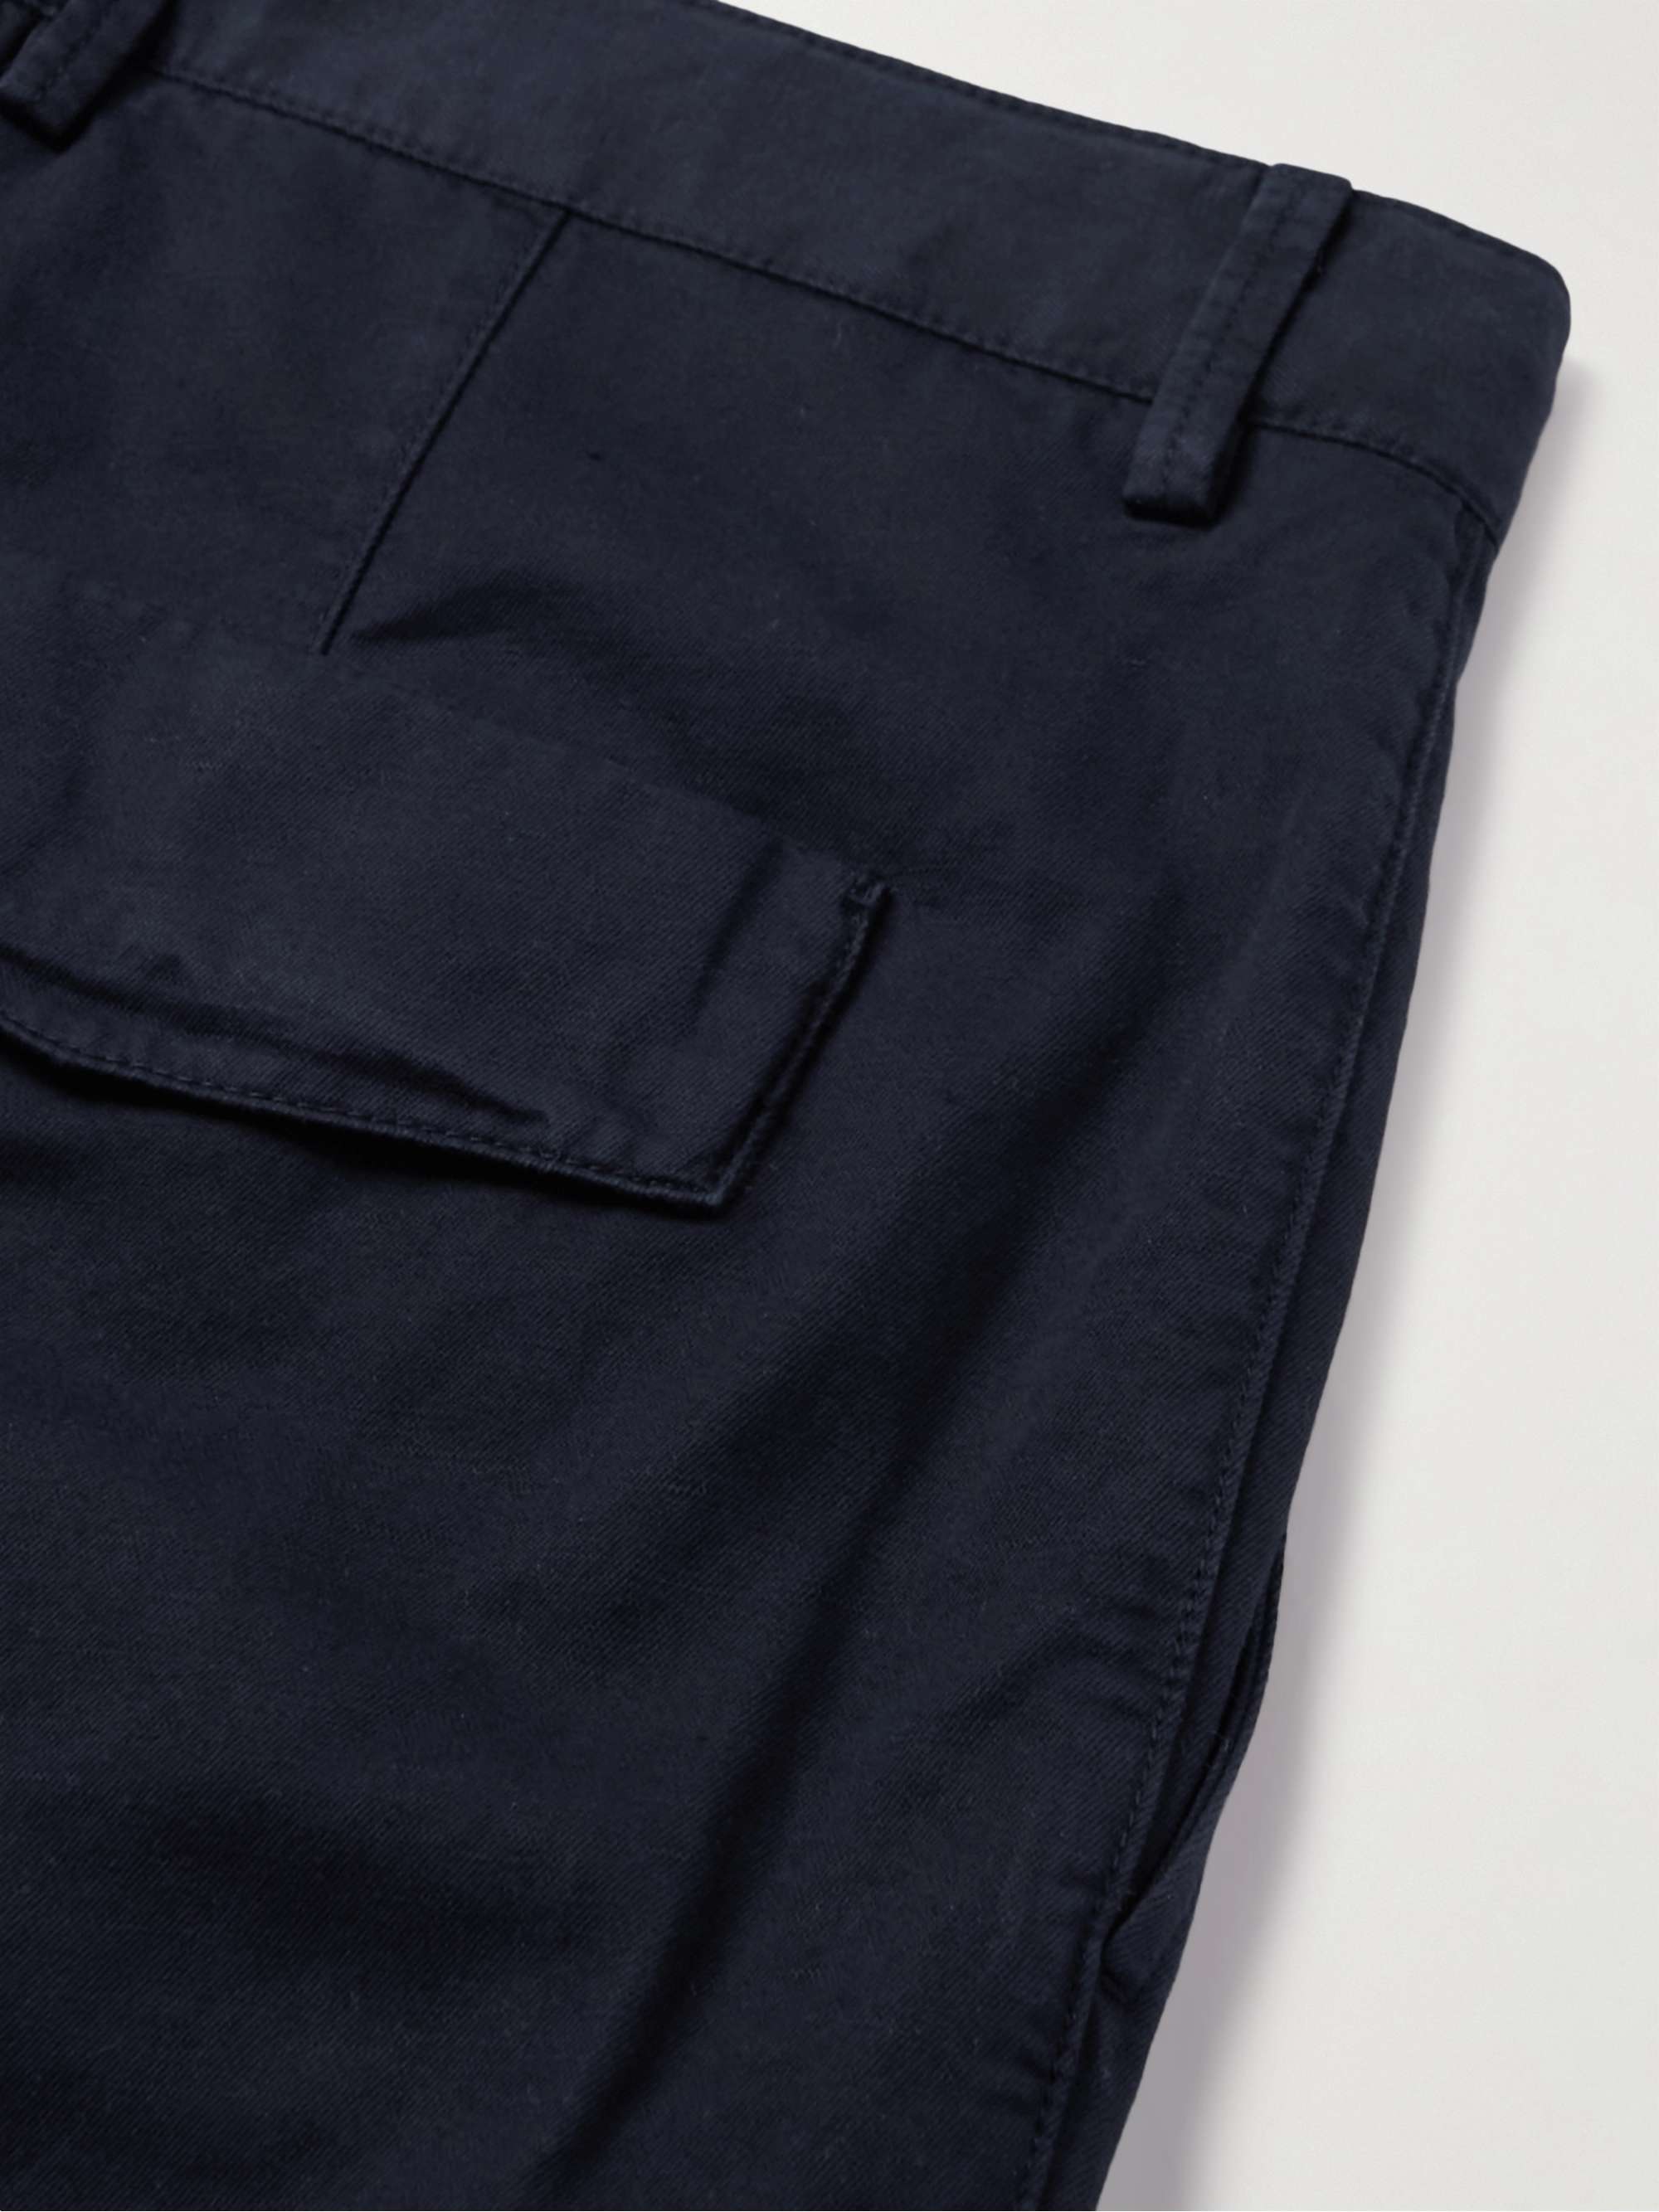 ZEGNA Straight-Leg Pleated Cotton and Linen-Blend Twill Shorts